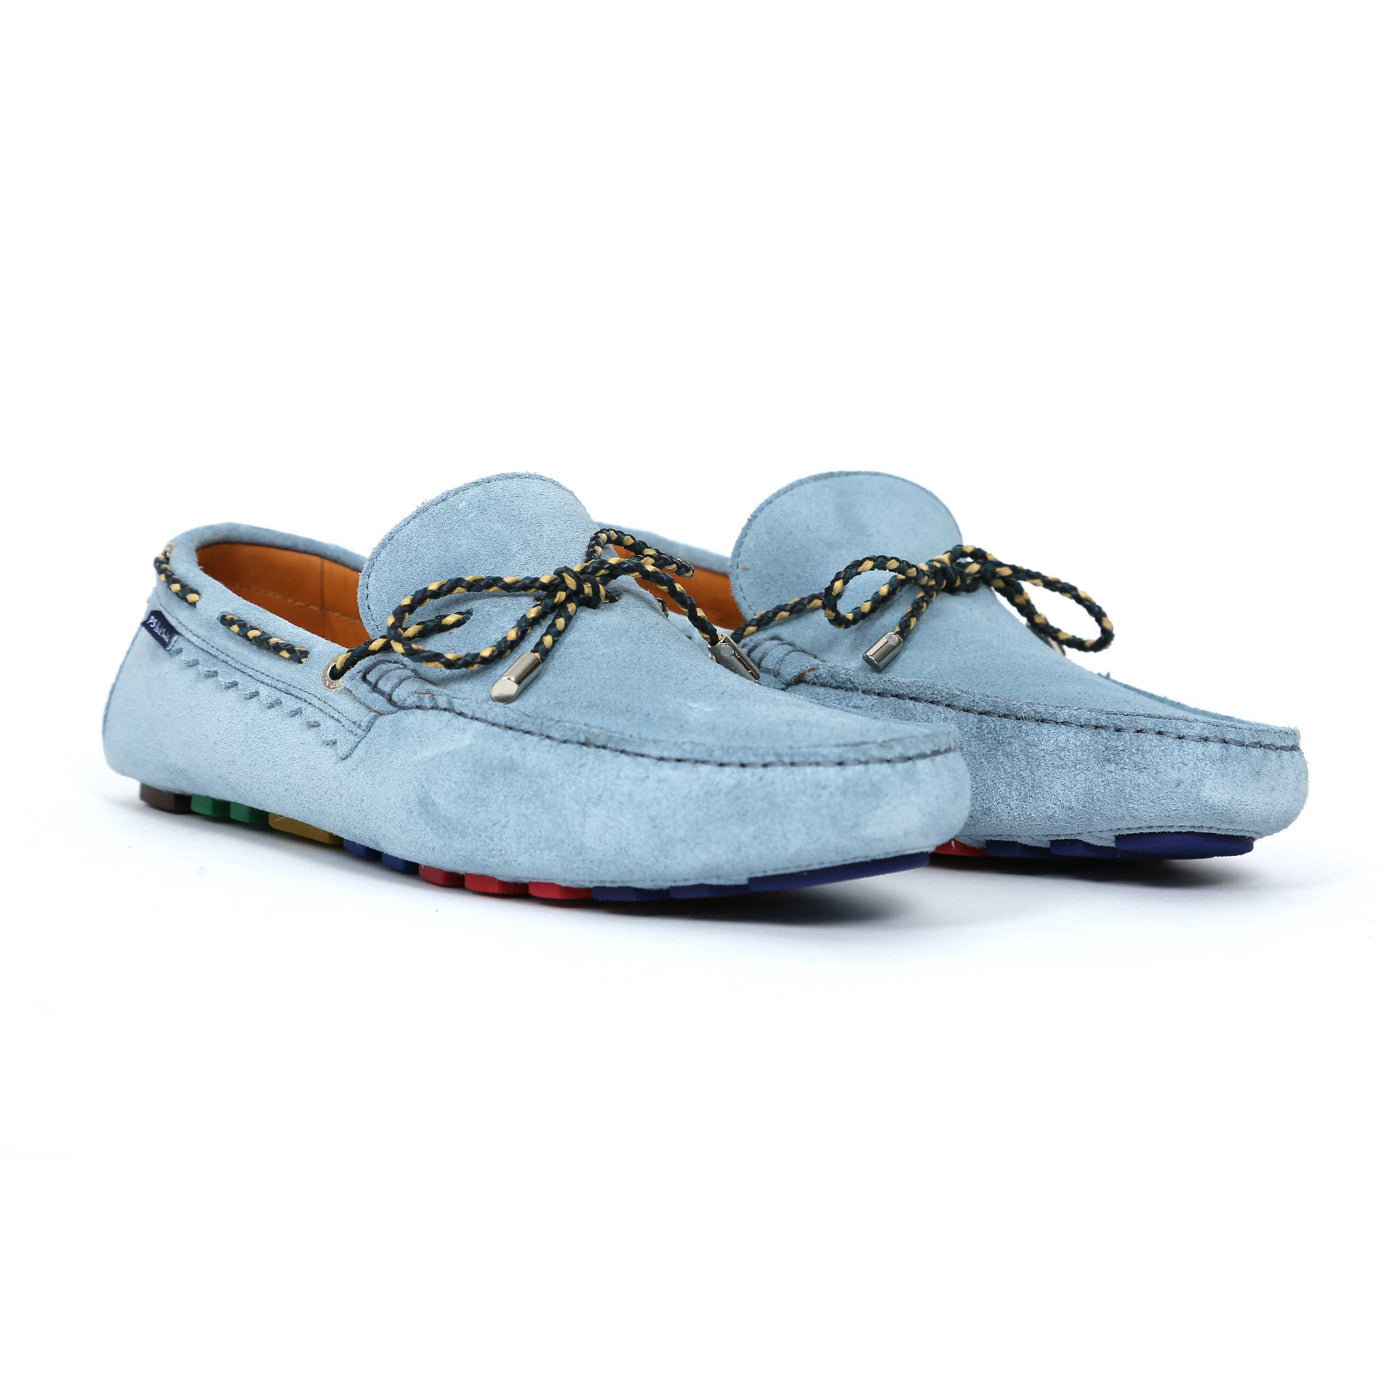 Paul Smith Springfield Loafer in Light Blue Pair